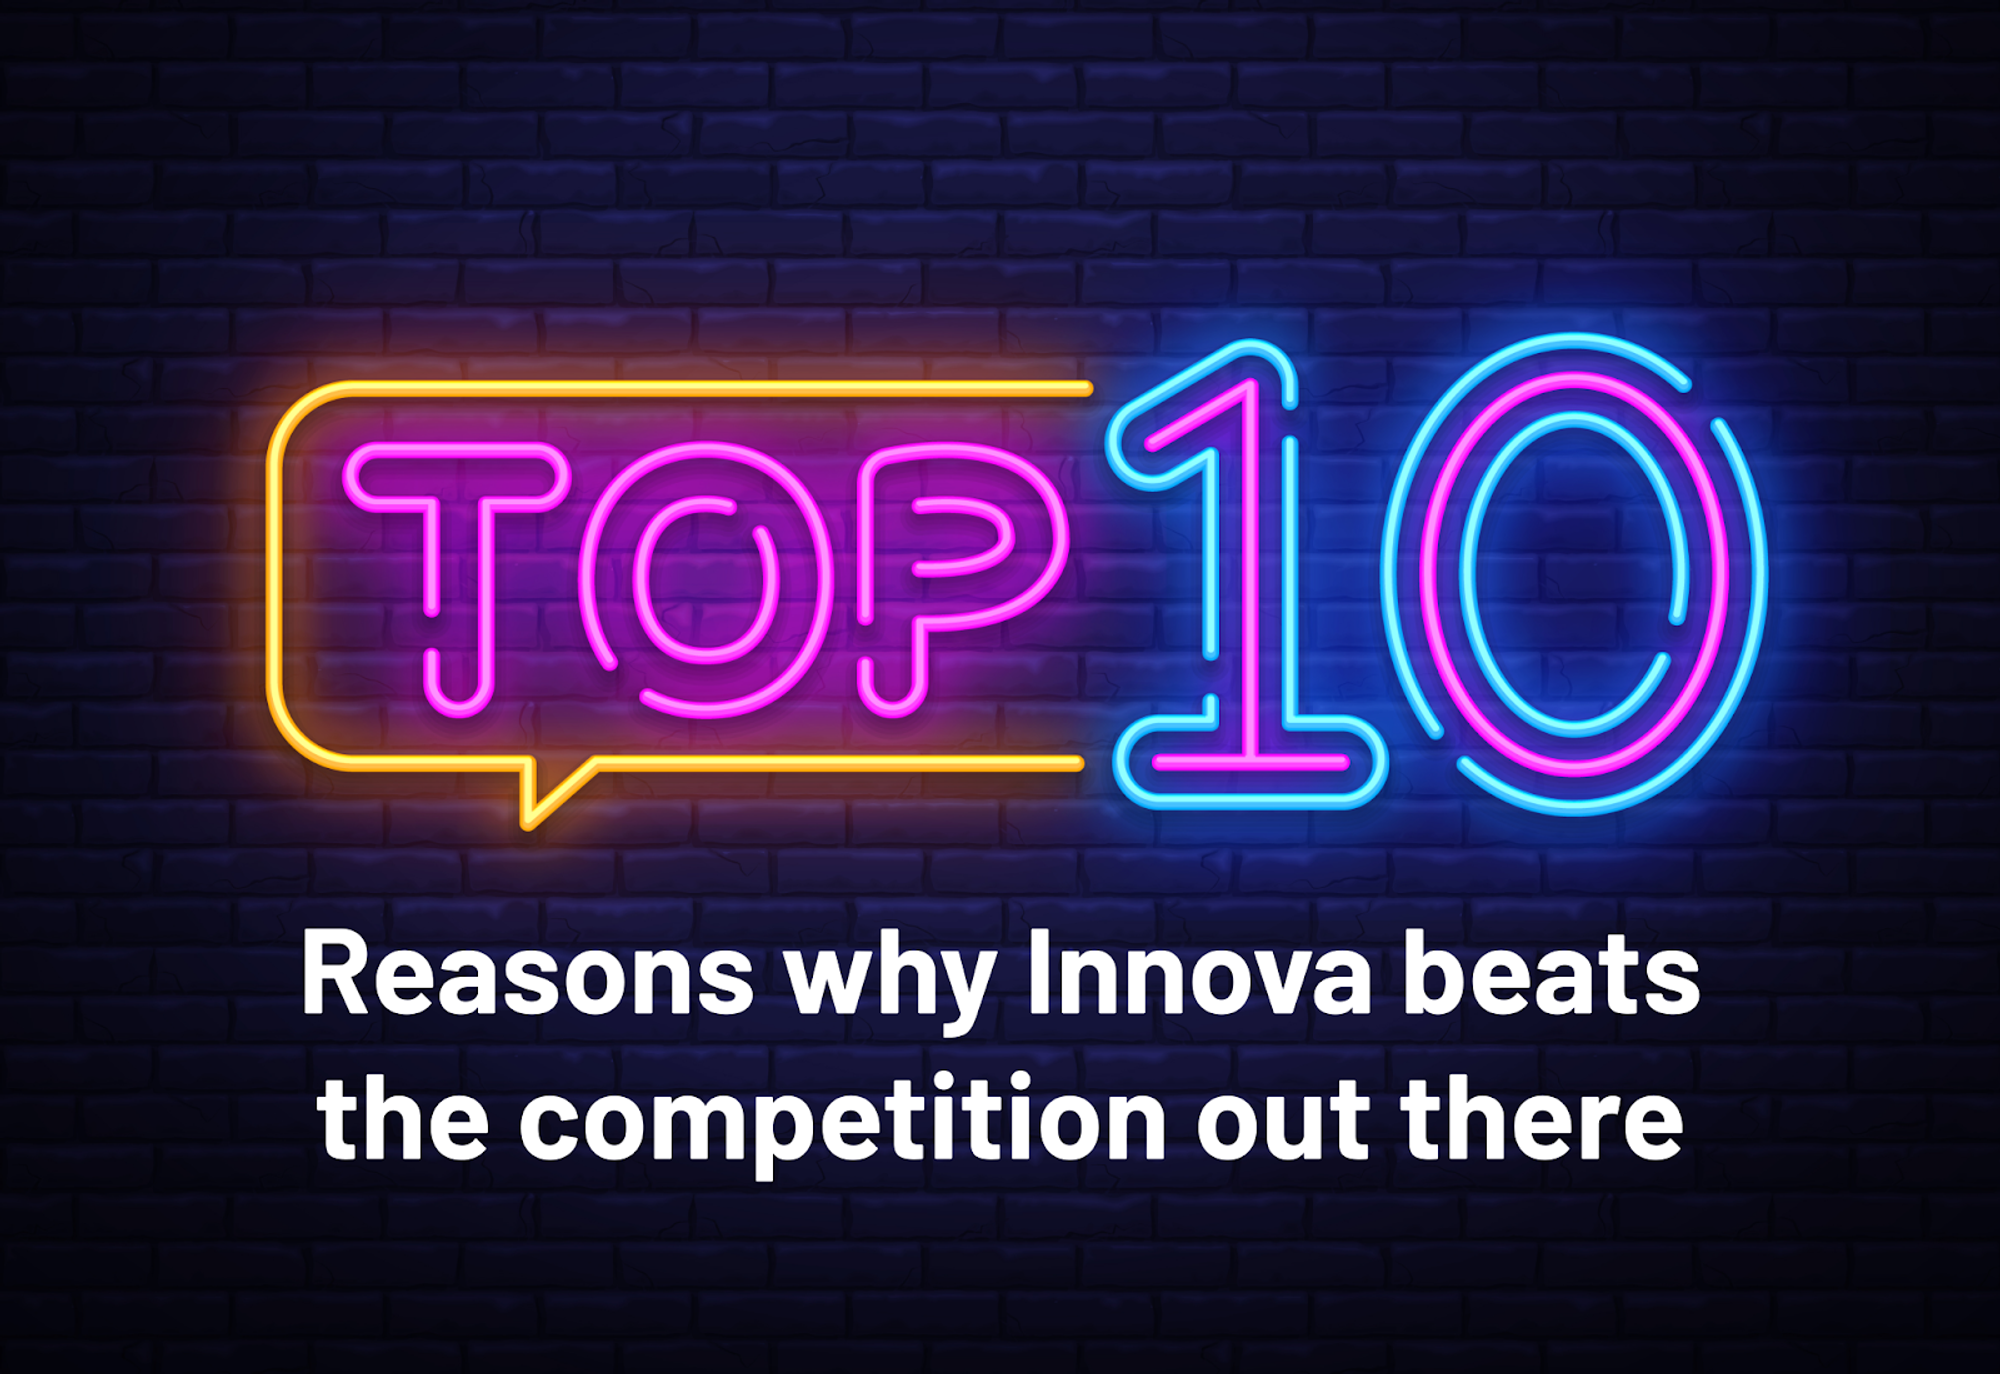 Top 10 Reasons why you should buy Innova scanners